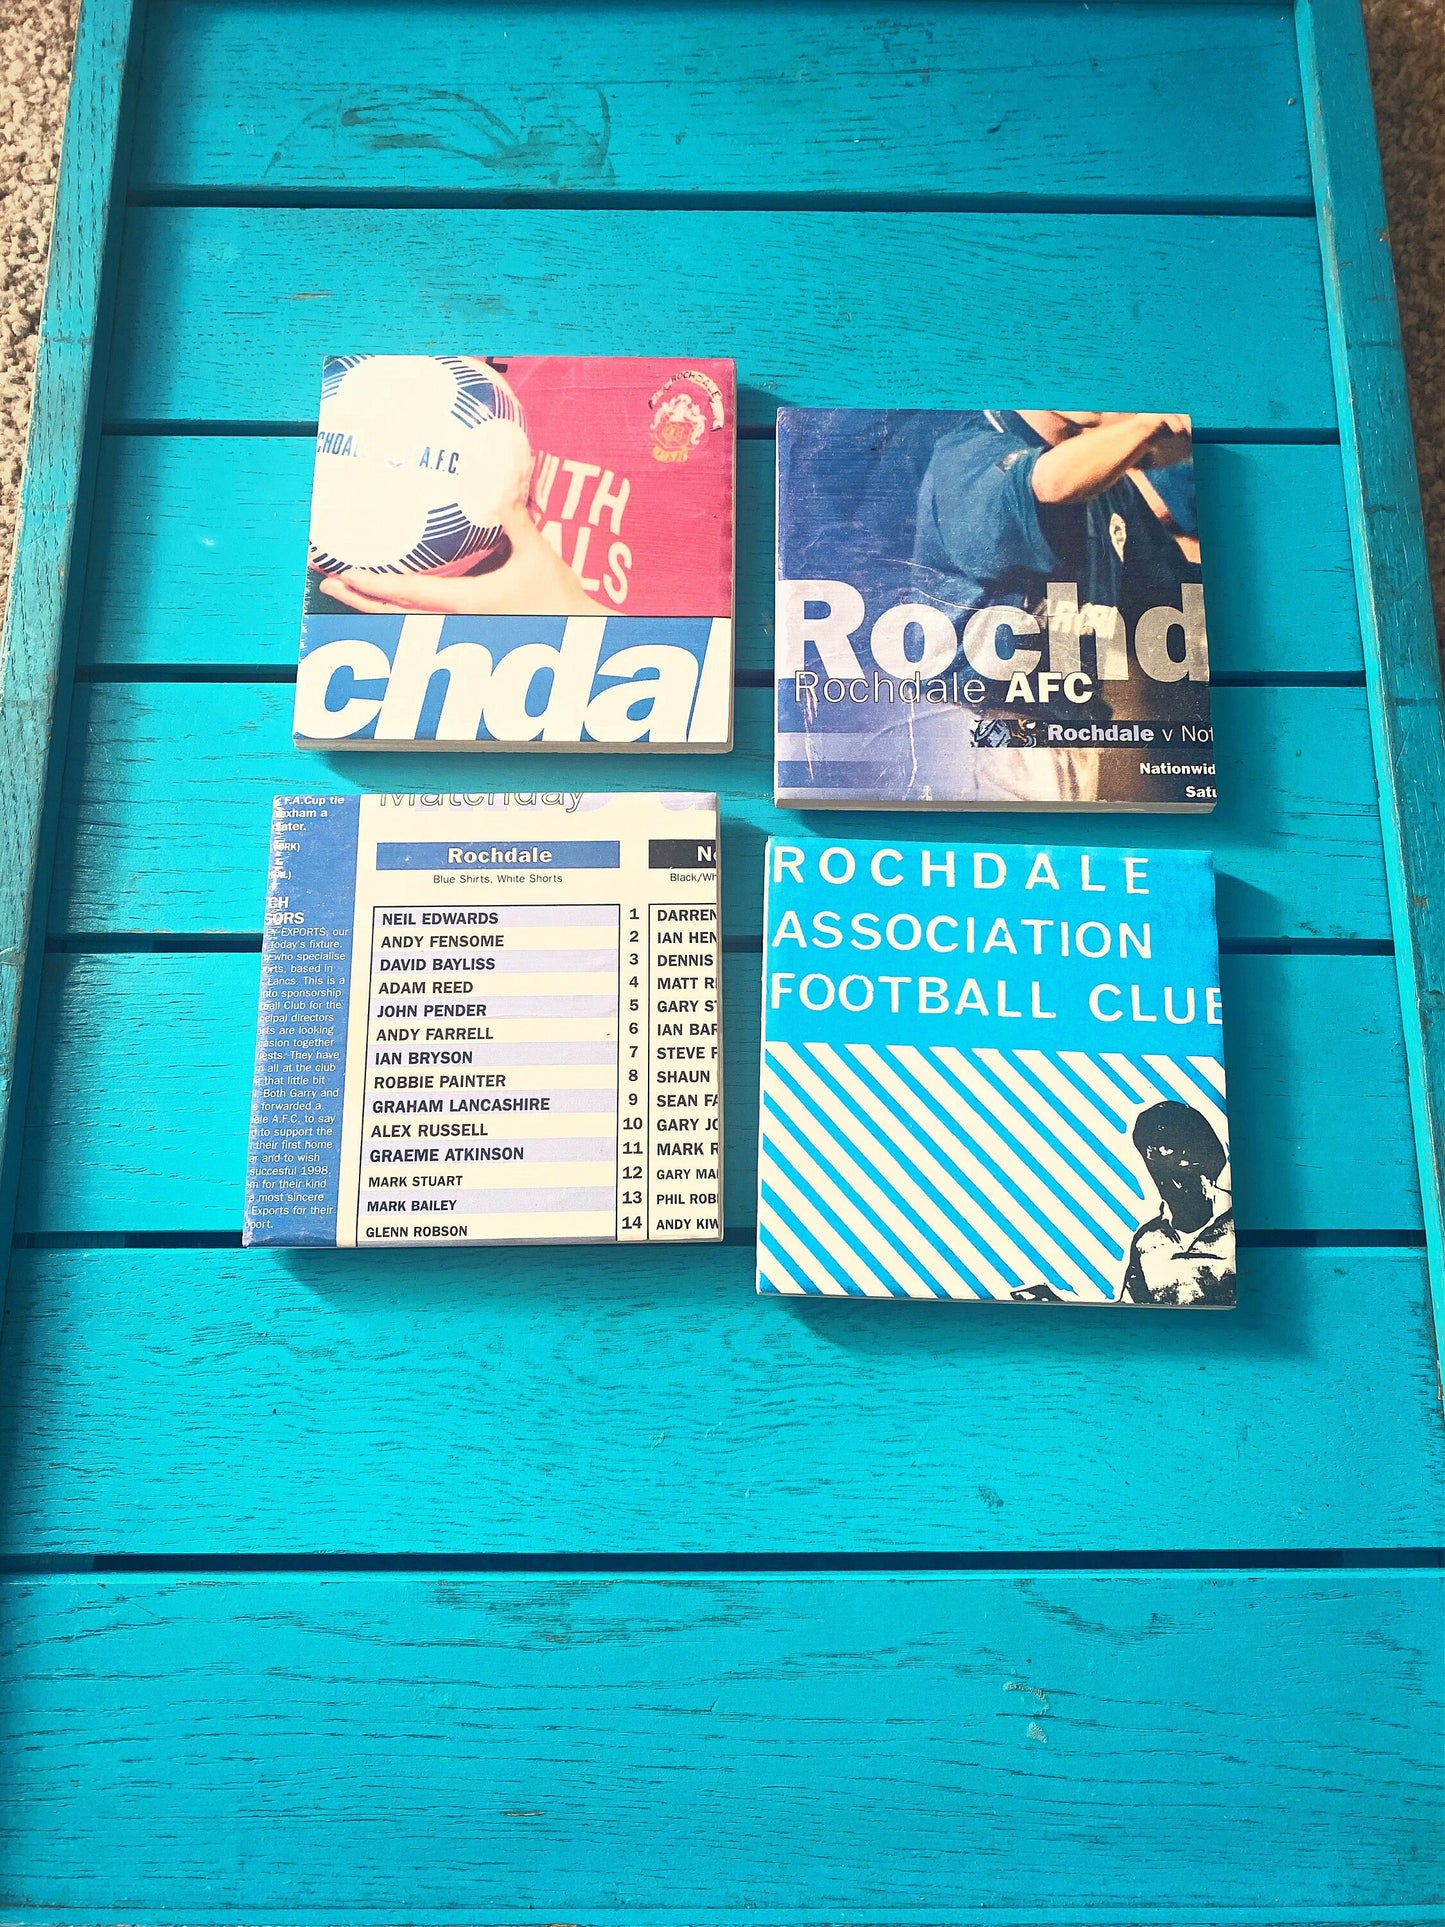 Vintage Rochdale AFC Football Programme Coasters. Upcycled Football Gift. Man Cave Home Decor. Retro Football Gift for Dad.